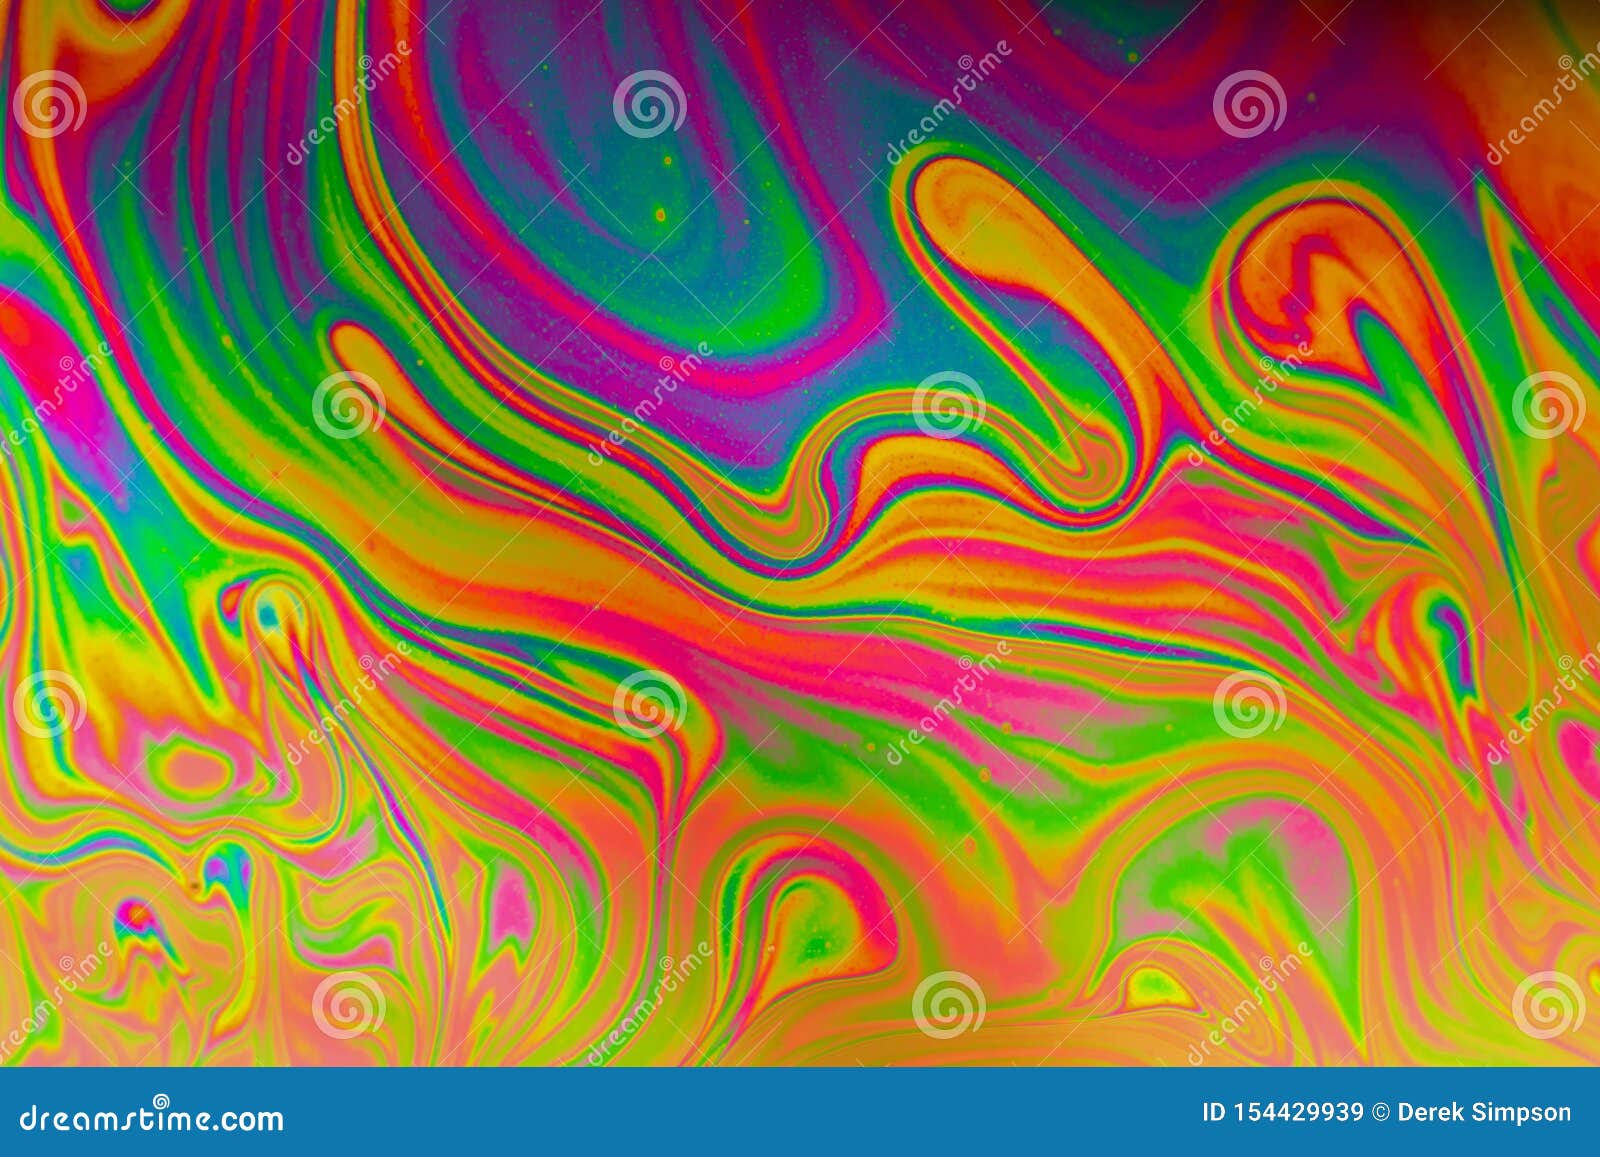 Vivid Multicolored, Trippy Abstract Showing a Rainbow Effect of ...